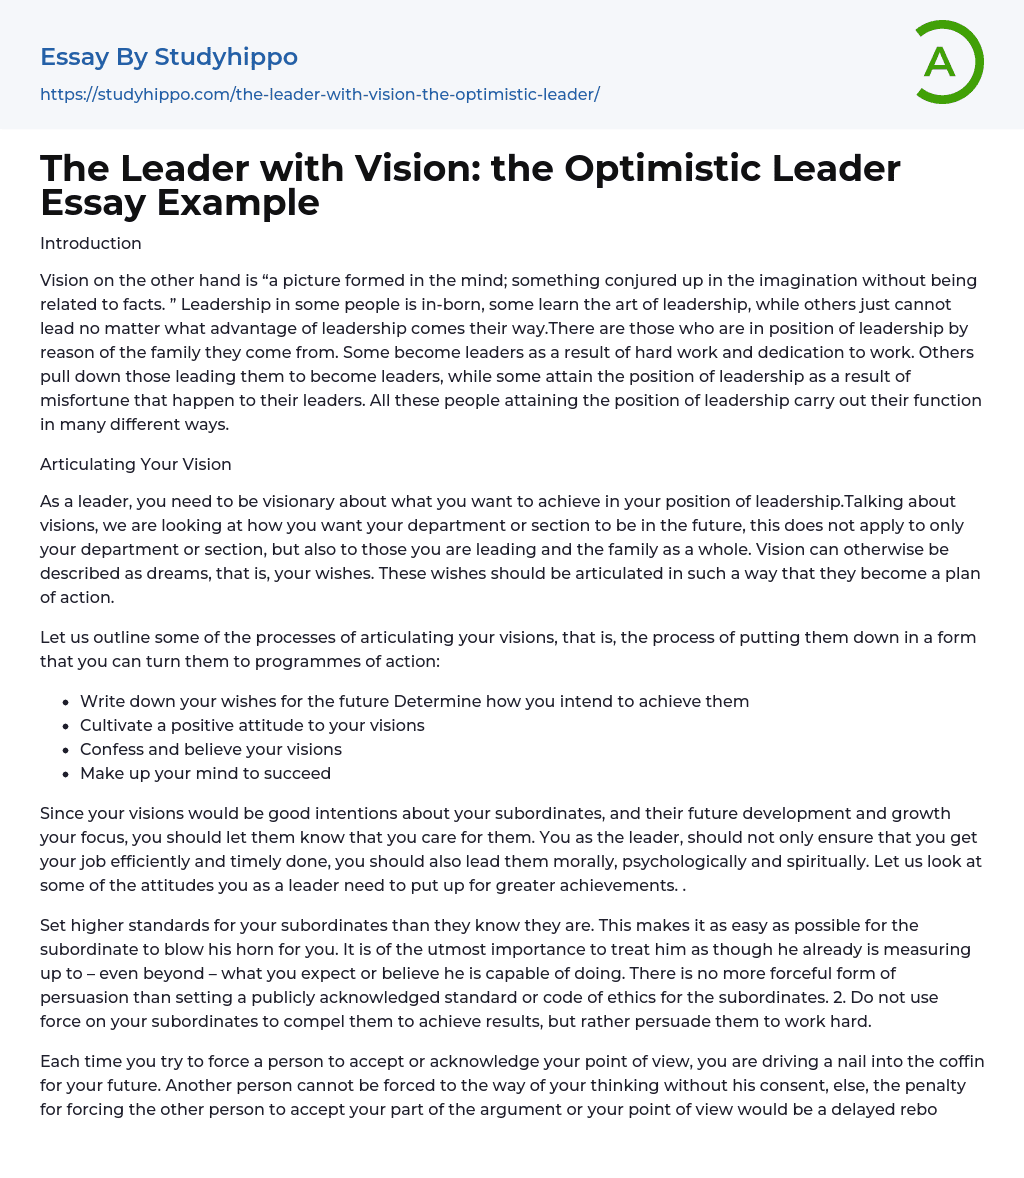 The Leader with Vision: the Optimistic Leader Essay Example